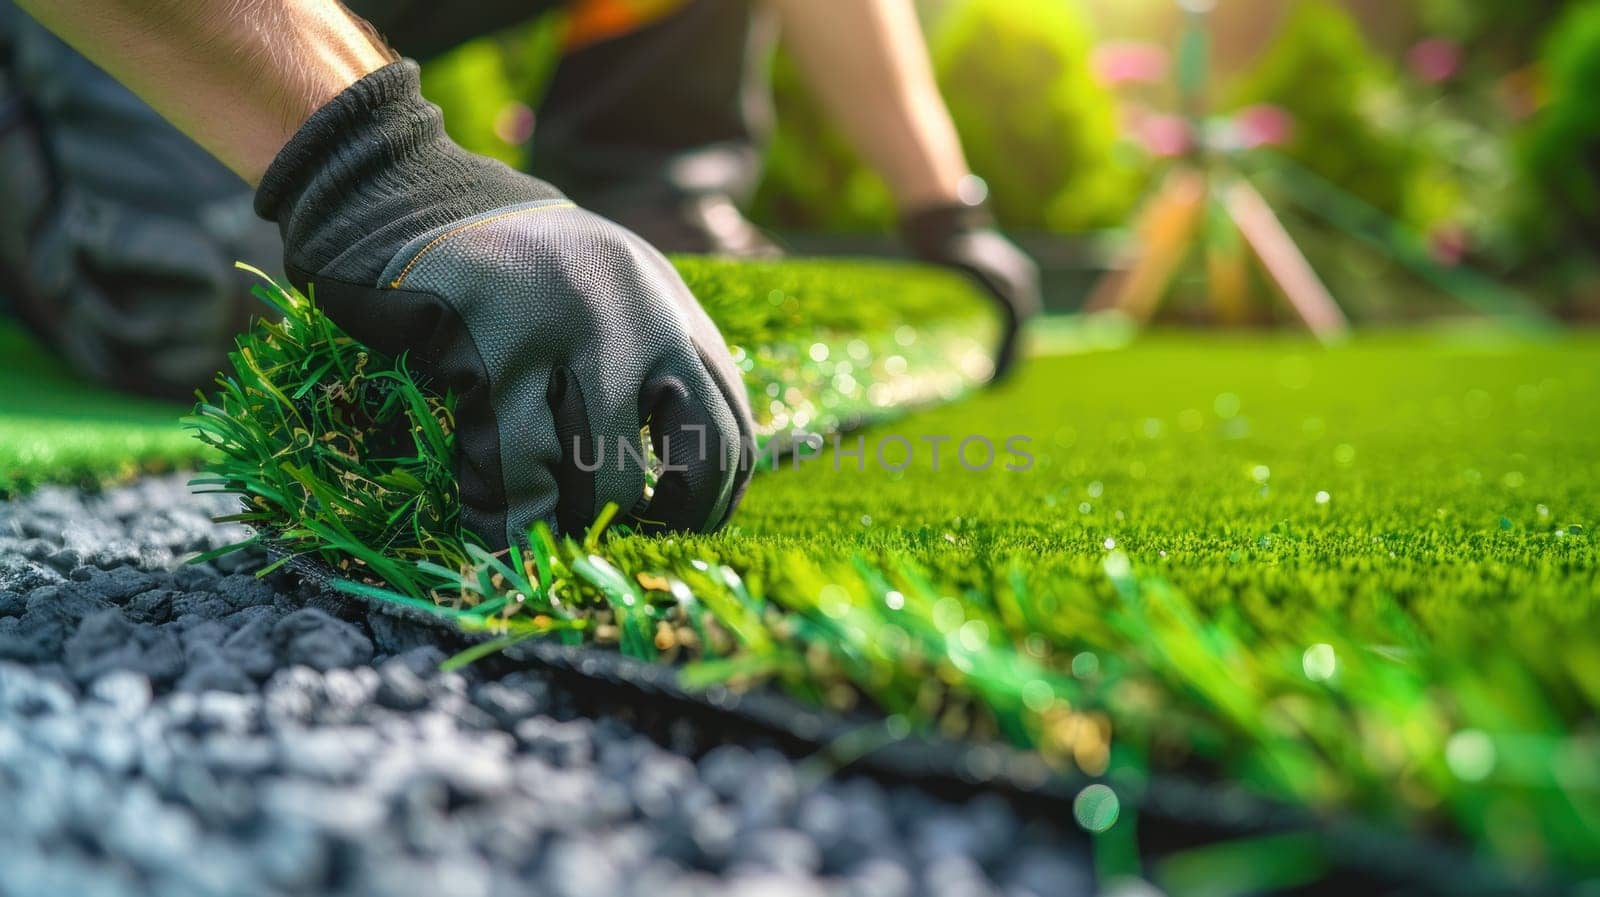 A man is laying down a piece of artificial grass. The grass is green and the man is wearing gloves